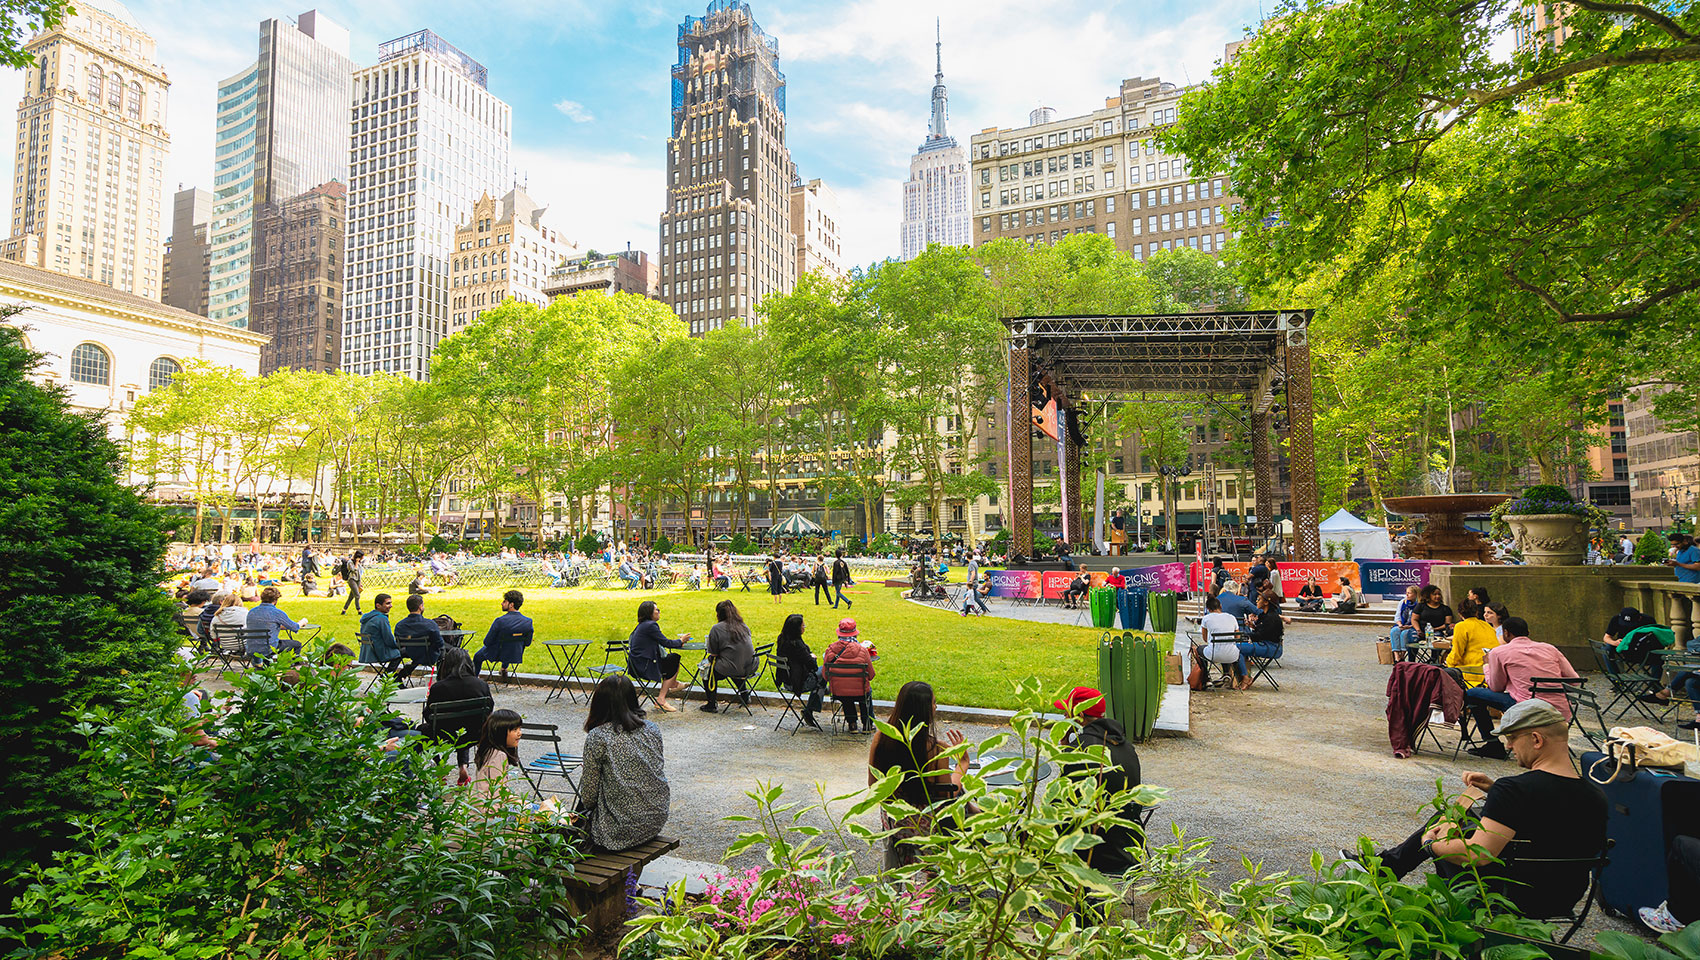 Bryant Park in Summer with green grass, trees, and people enjoying the park